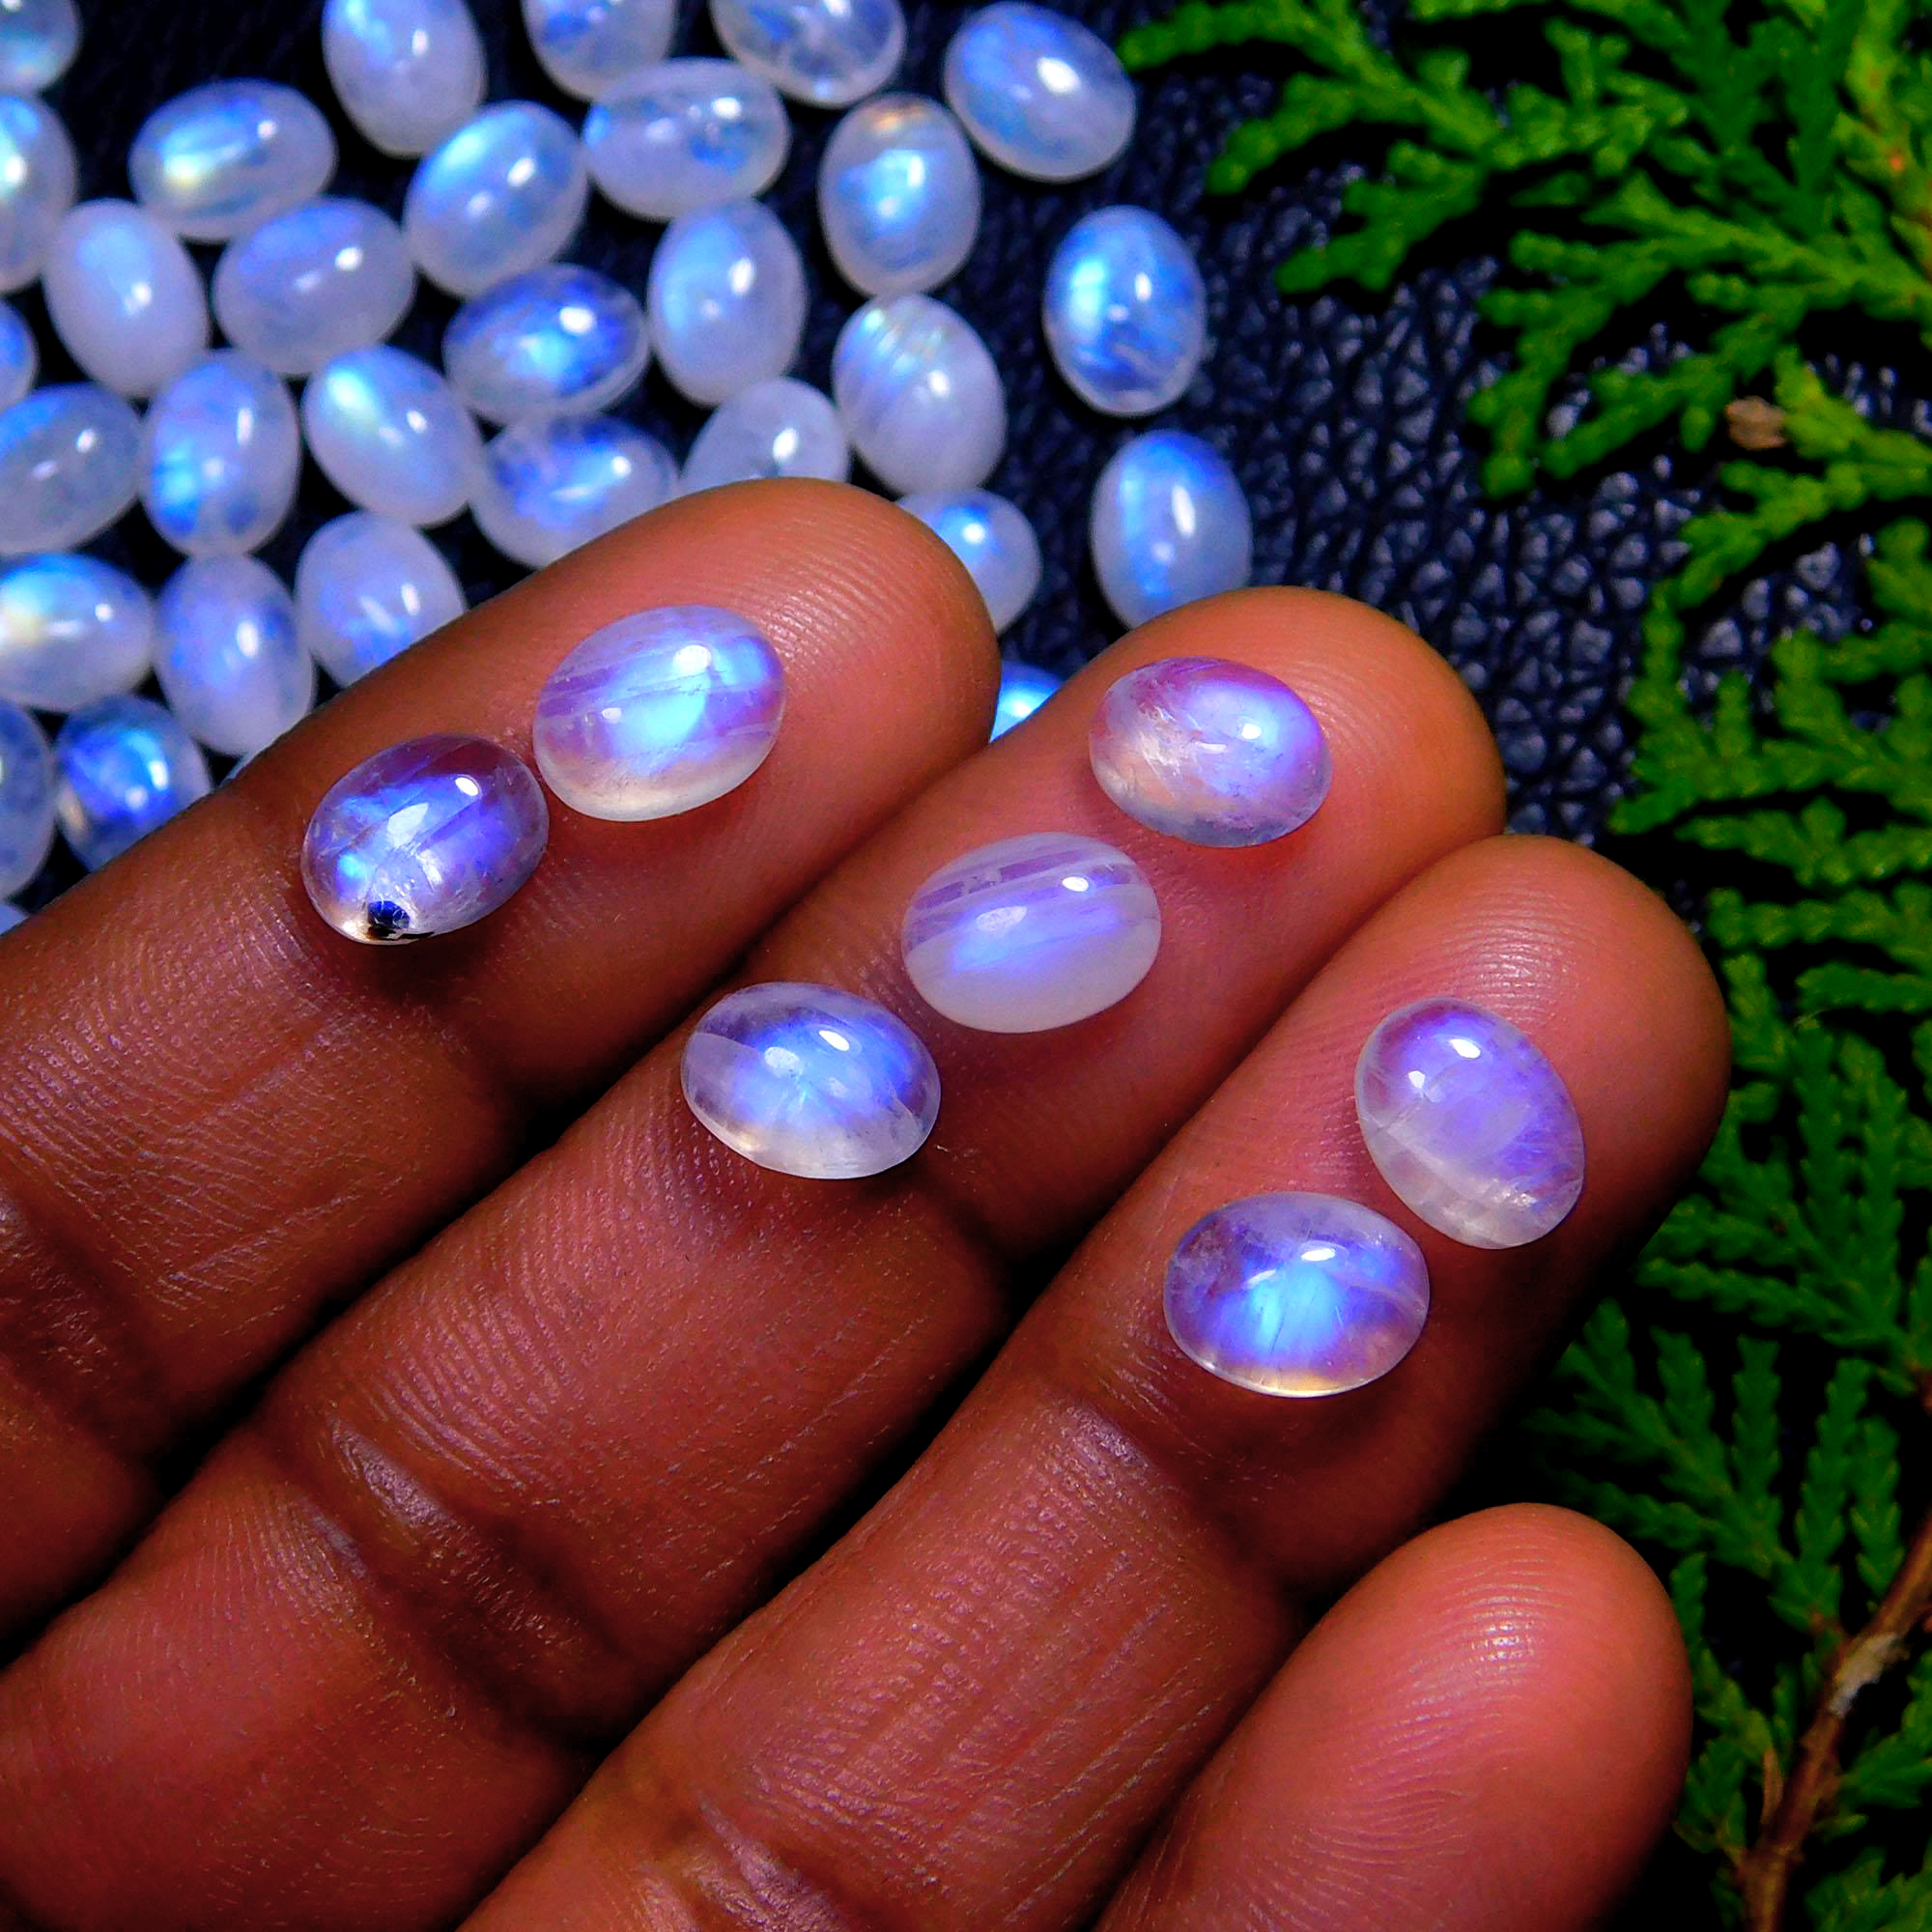 154Pcs 252Cts Natural Rainbow Moonstone Oval Shape Blue Fire Cabochon Lot Loose Gemstone Jewelry Crystal For Birthday Gift 8X6mm #9855